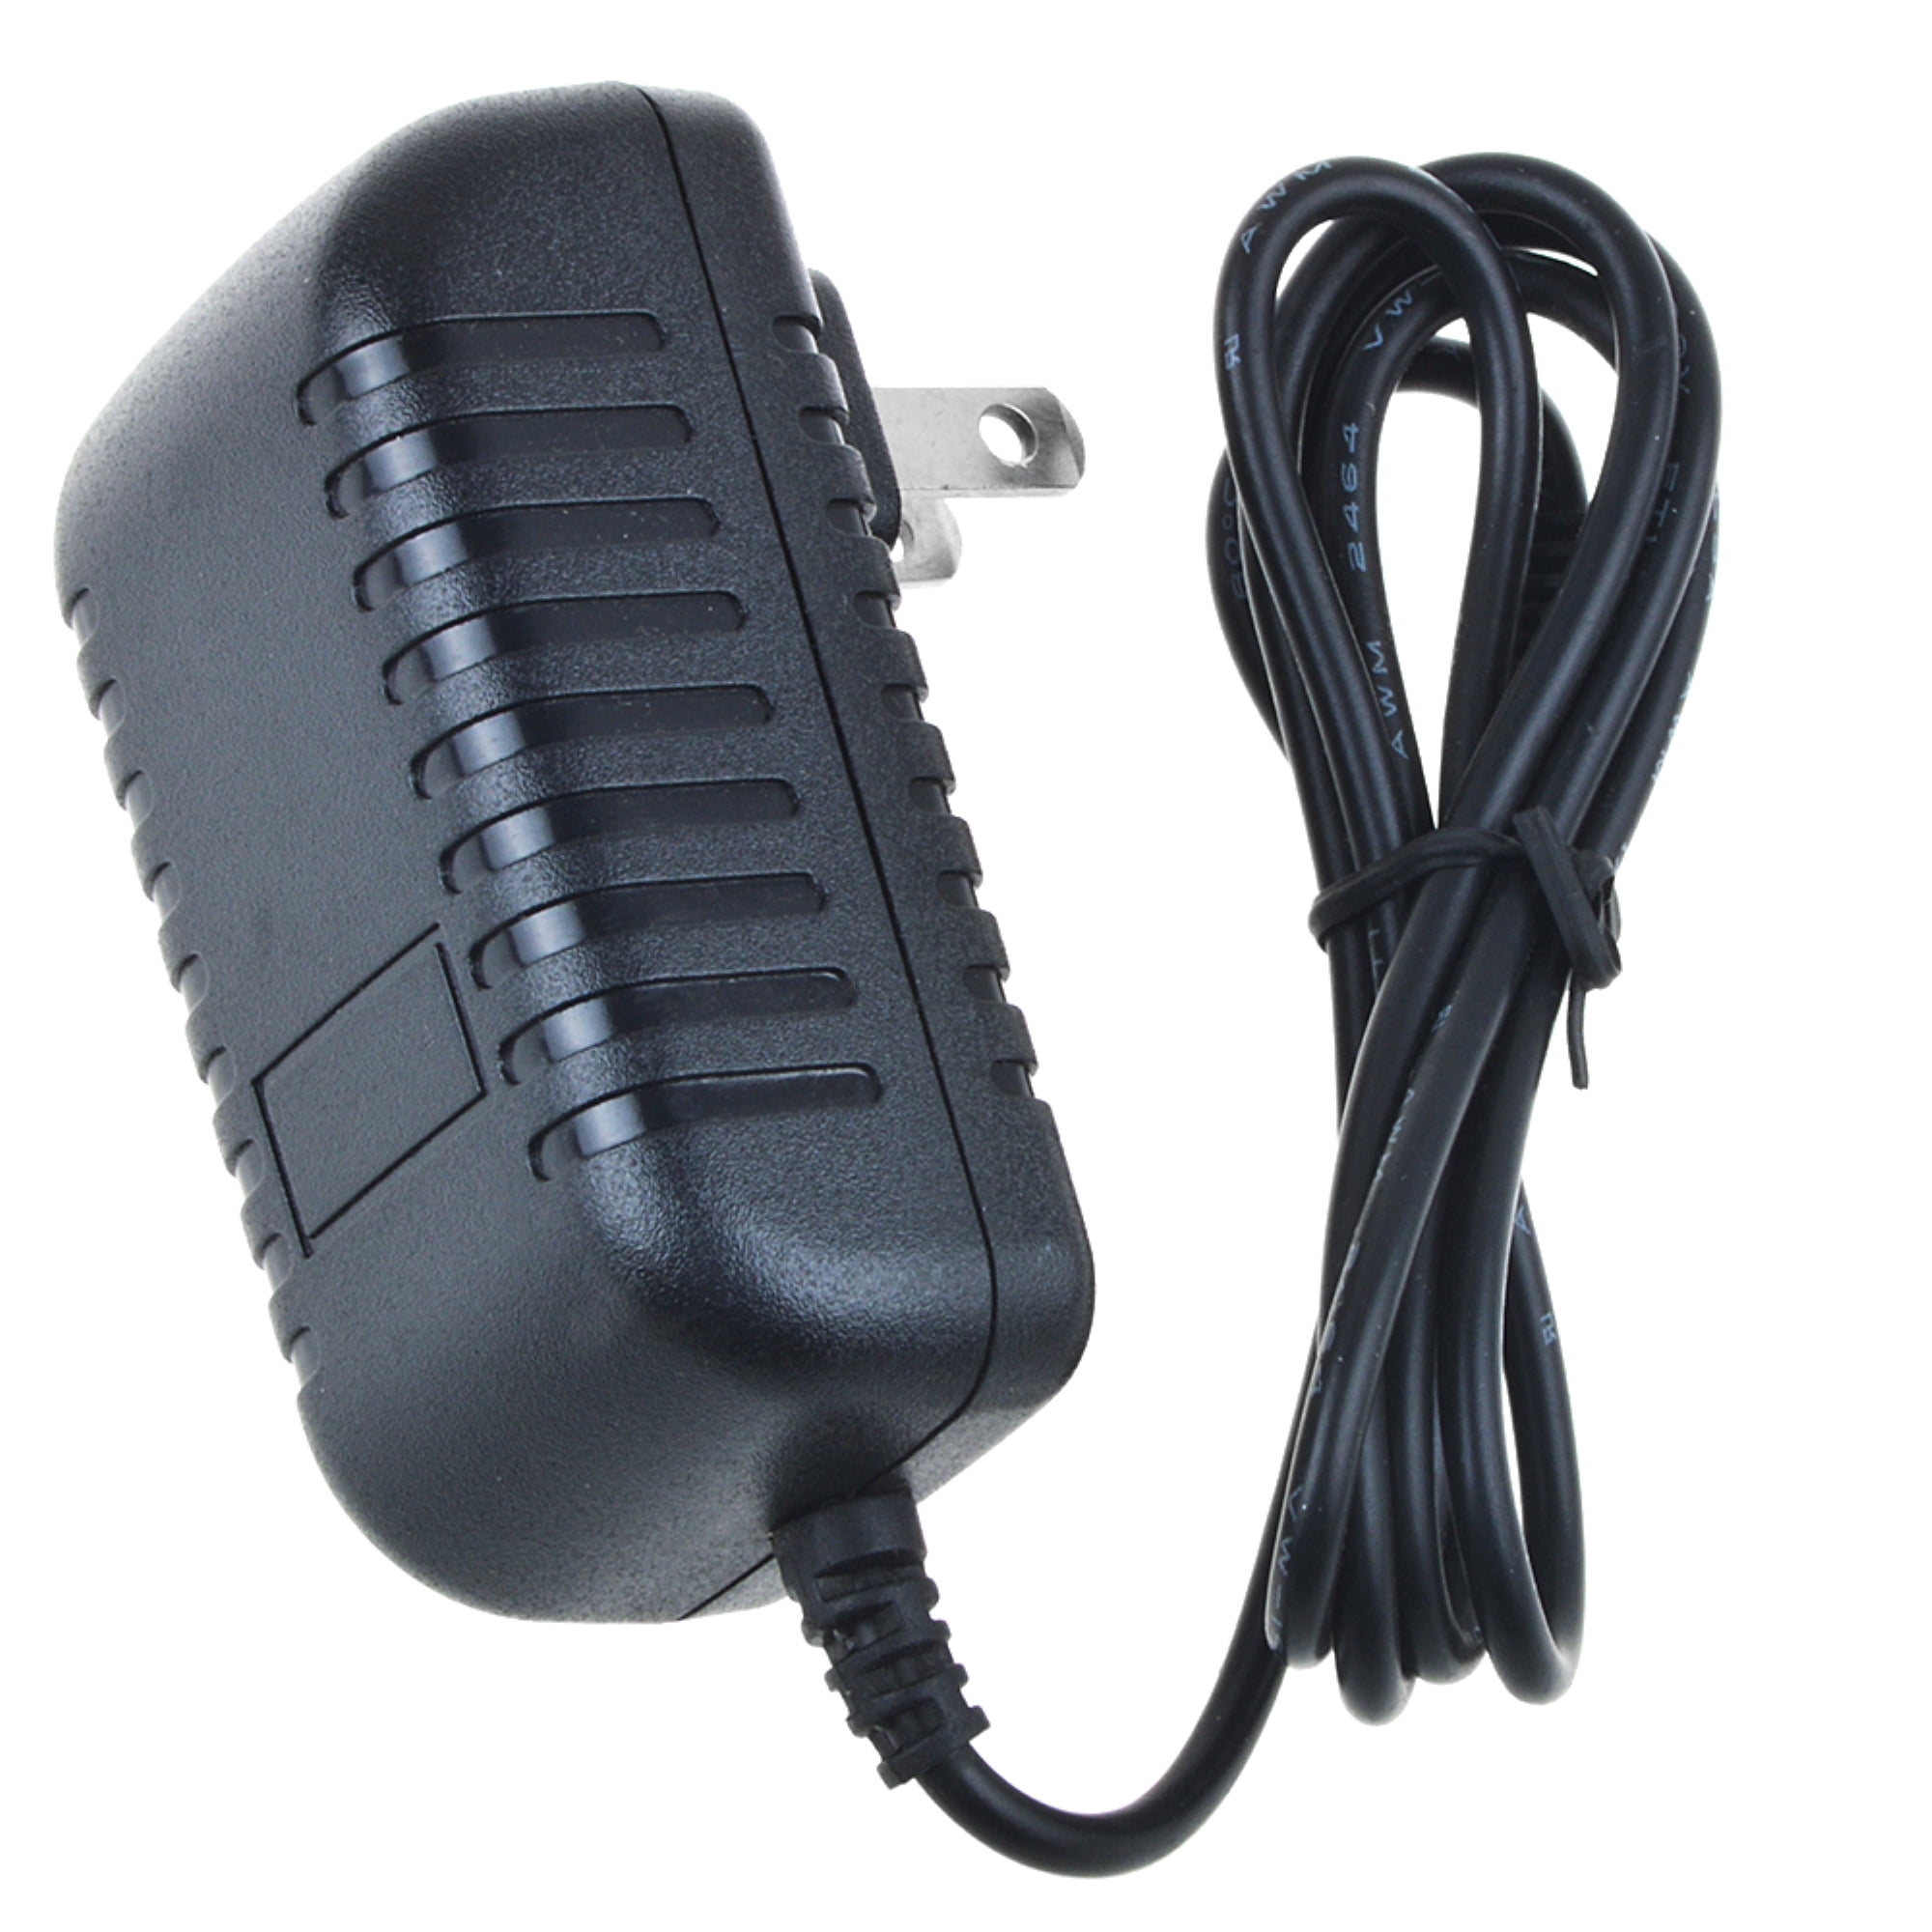 AC Adapter for Canon ES75 Hi8 Hi-8 Camcorder Charger Power Supply Cord PSU Mains 